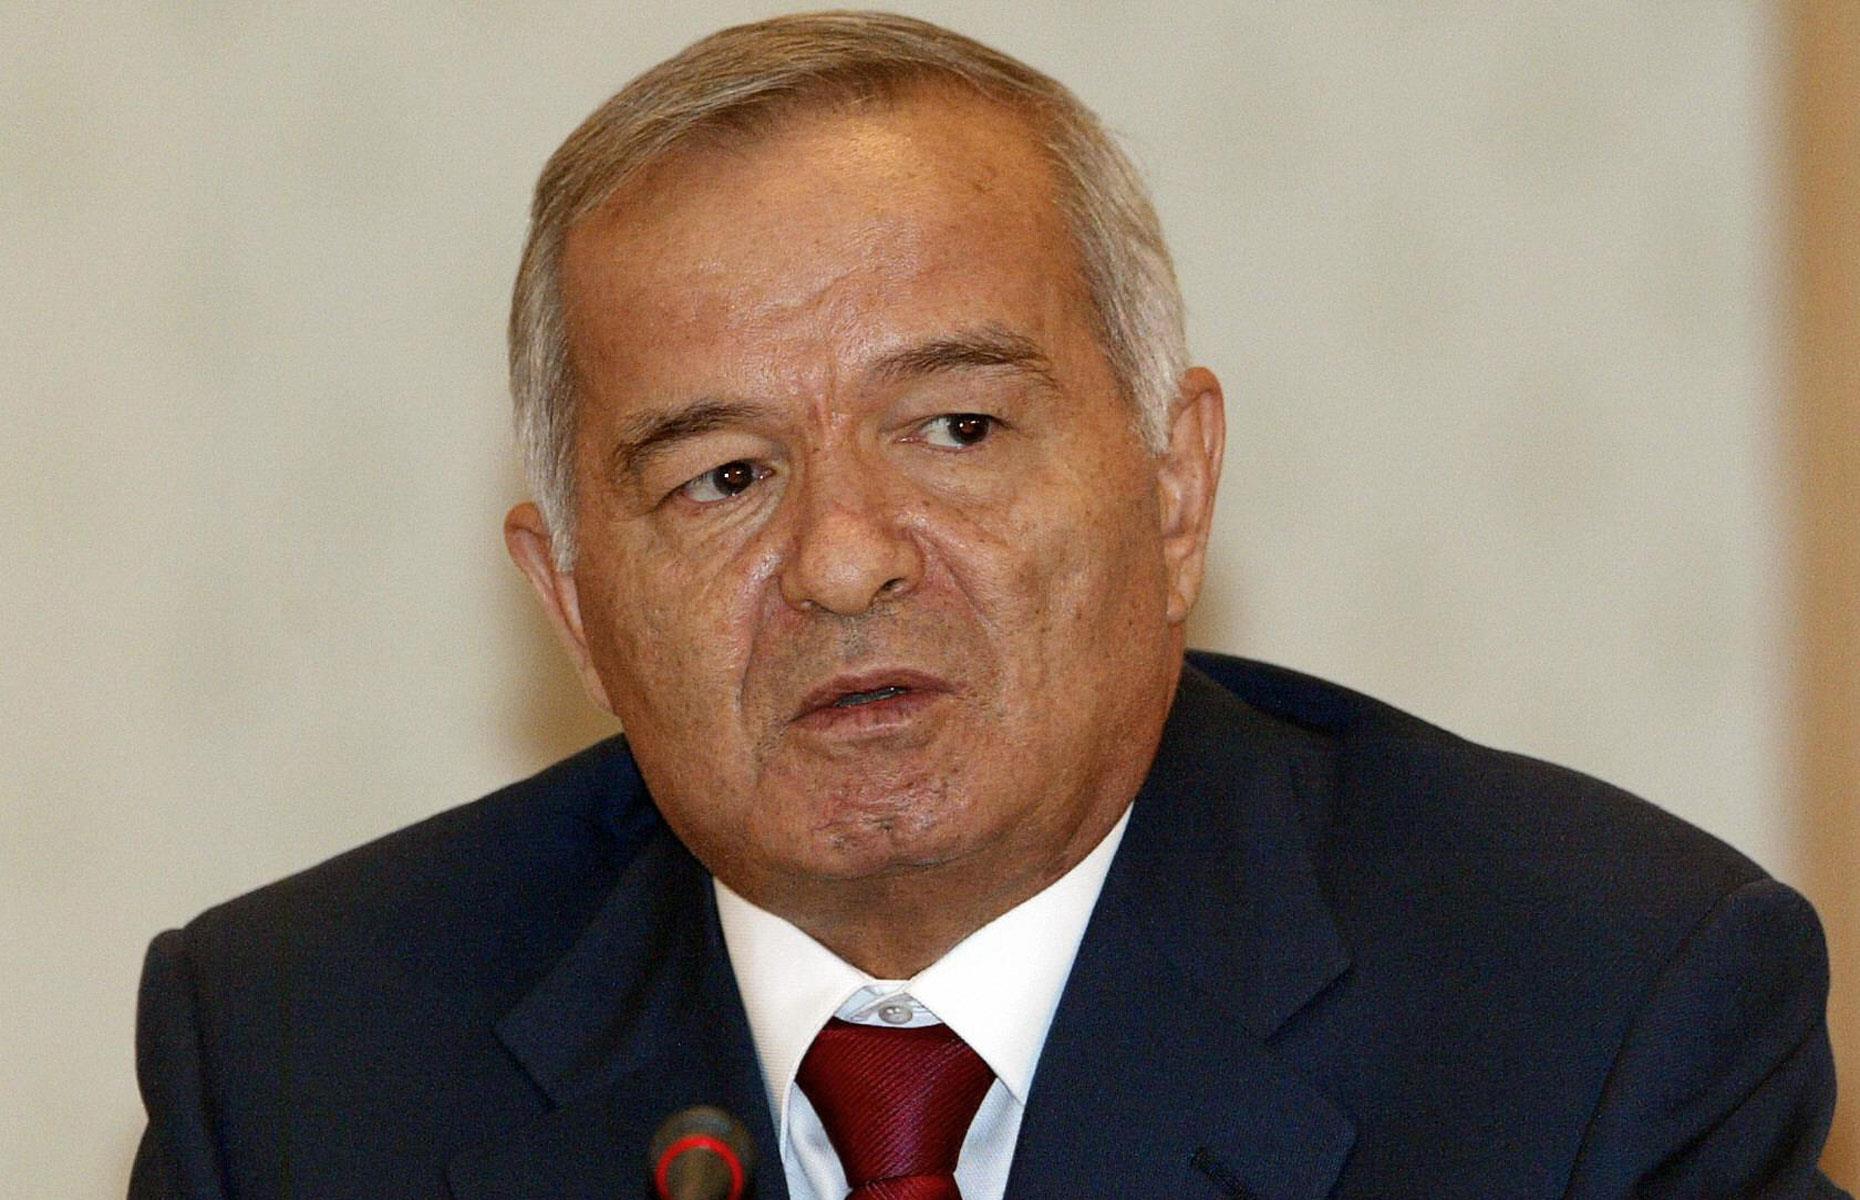 Islam Karimov was the leader of Uzbekistan and its precursor, the Uzbek Soviet Socialist Republic, from 1989 until his death in 2016. The president ruled the country with an iron fist – human rights abuses were commonplace and the press was severely constrained. Karmiov also enjoyed emptying the state's coffers – his net worth was thought to be $1 billion.